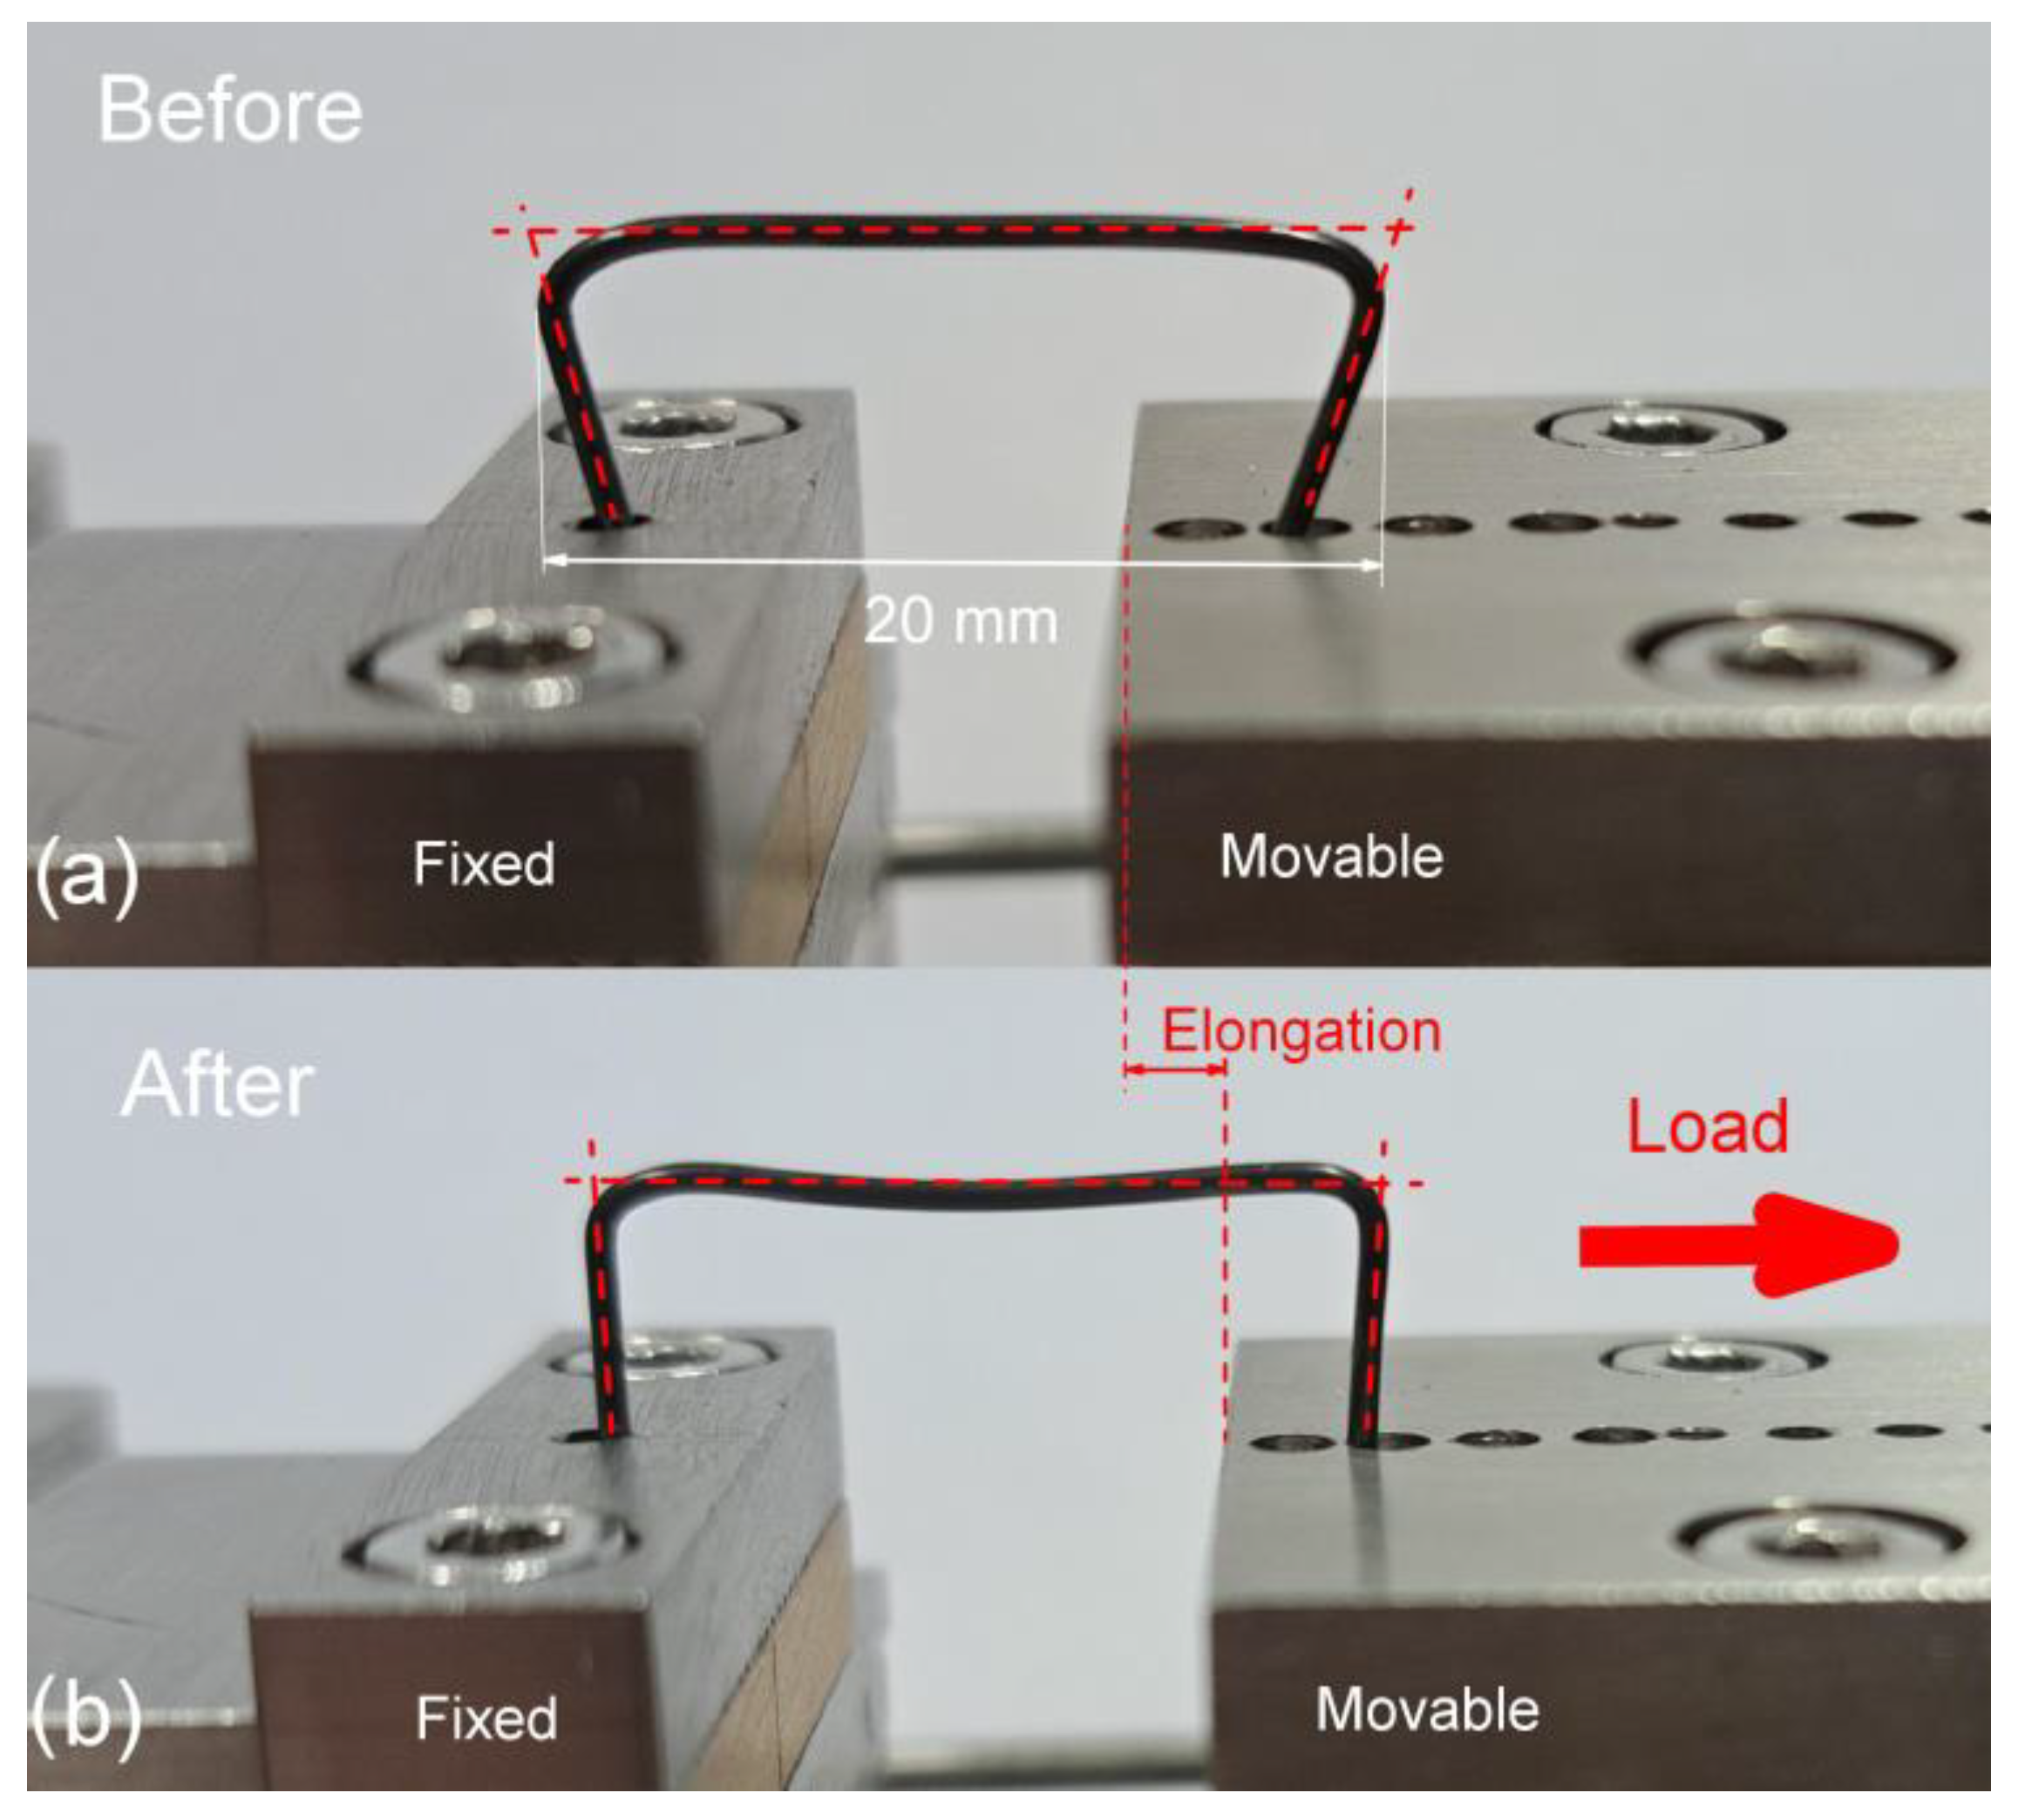 Solved The clamp shown in (Figure 1) has a rated load